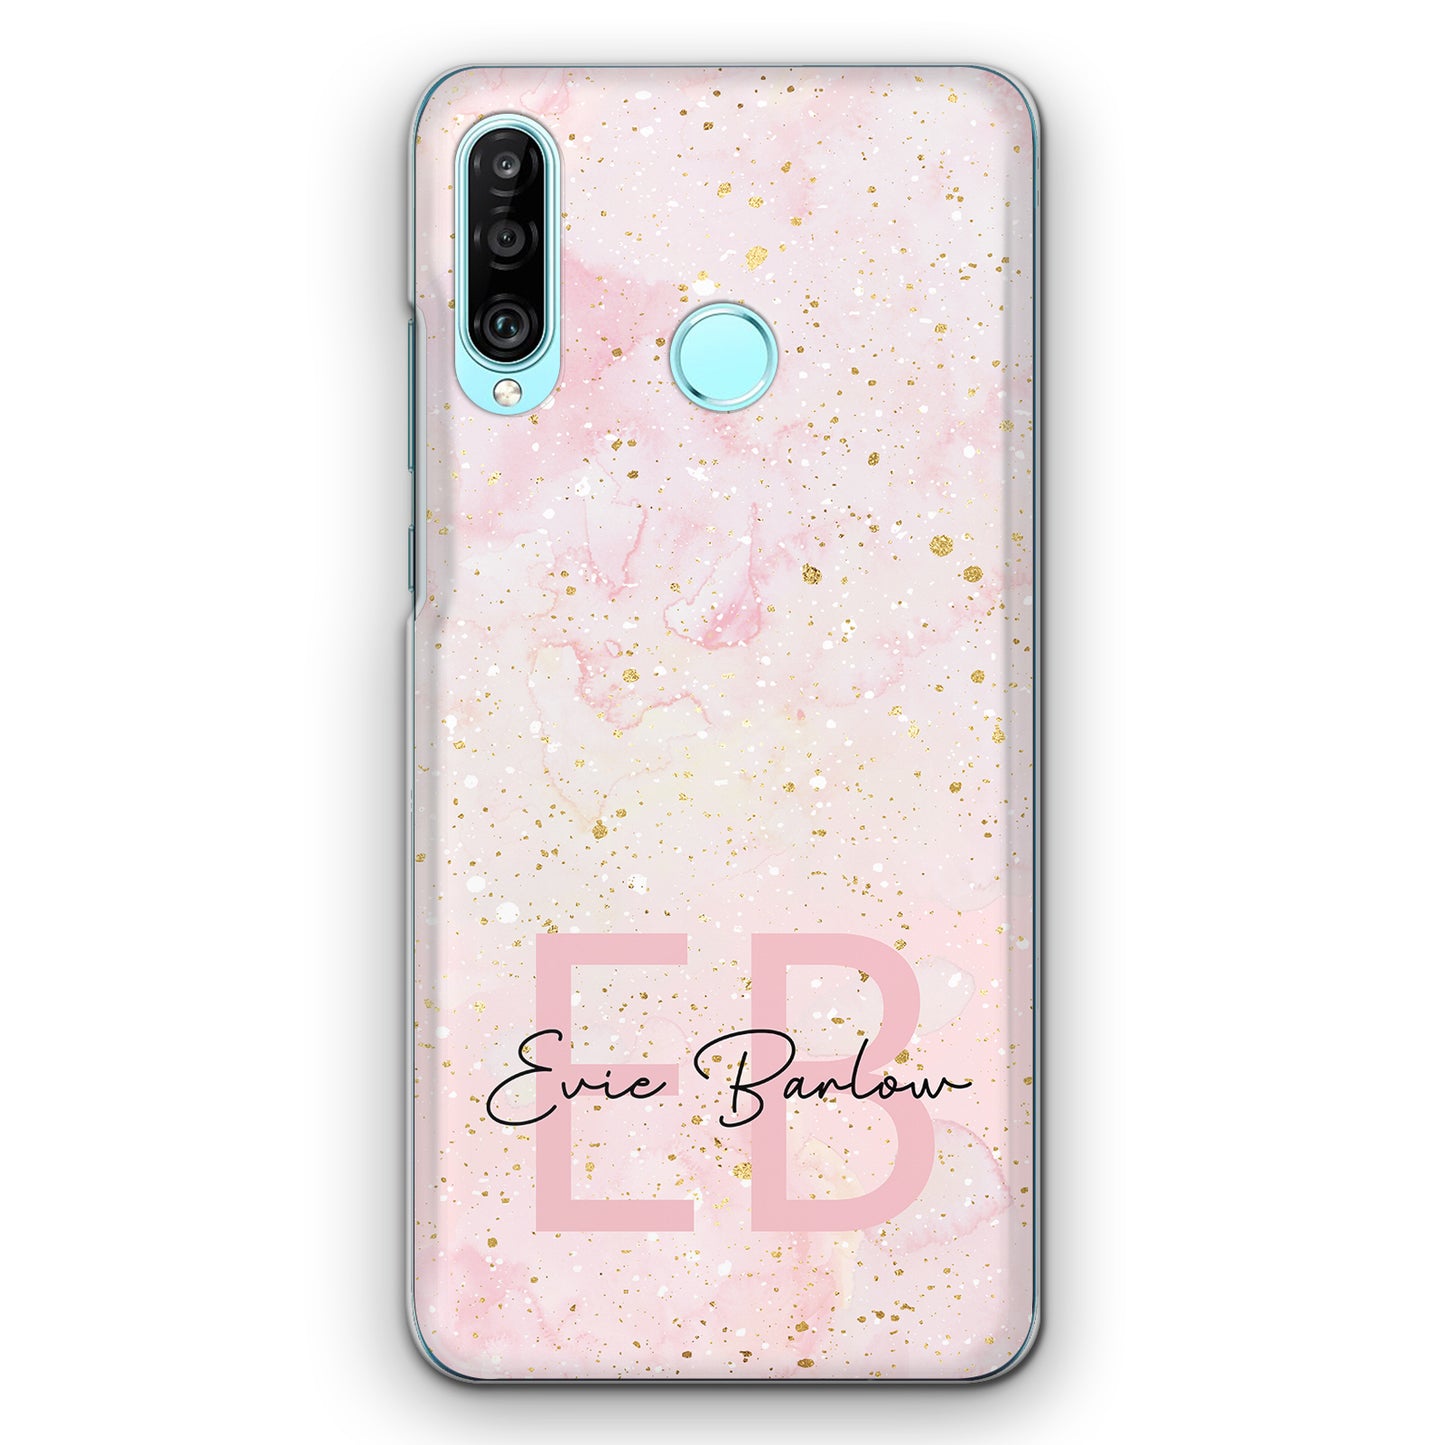 Personalised OnePlus Phone Hard Case with Soft Monogram and Name on Baby Pink Marble